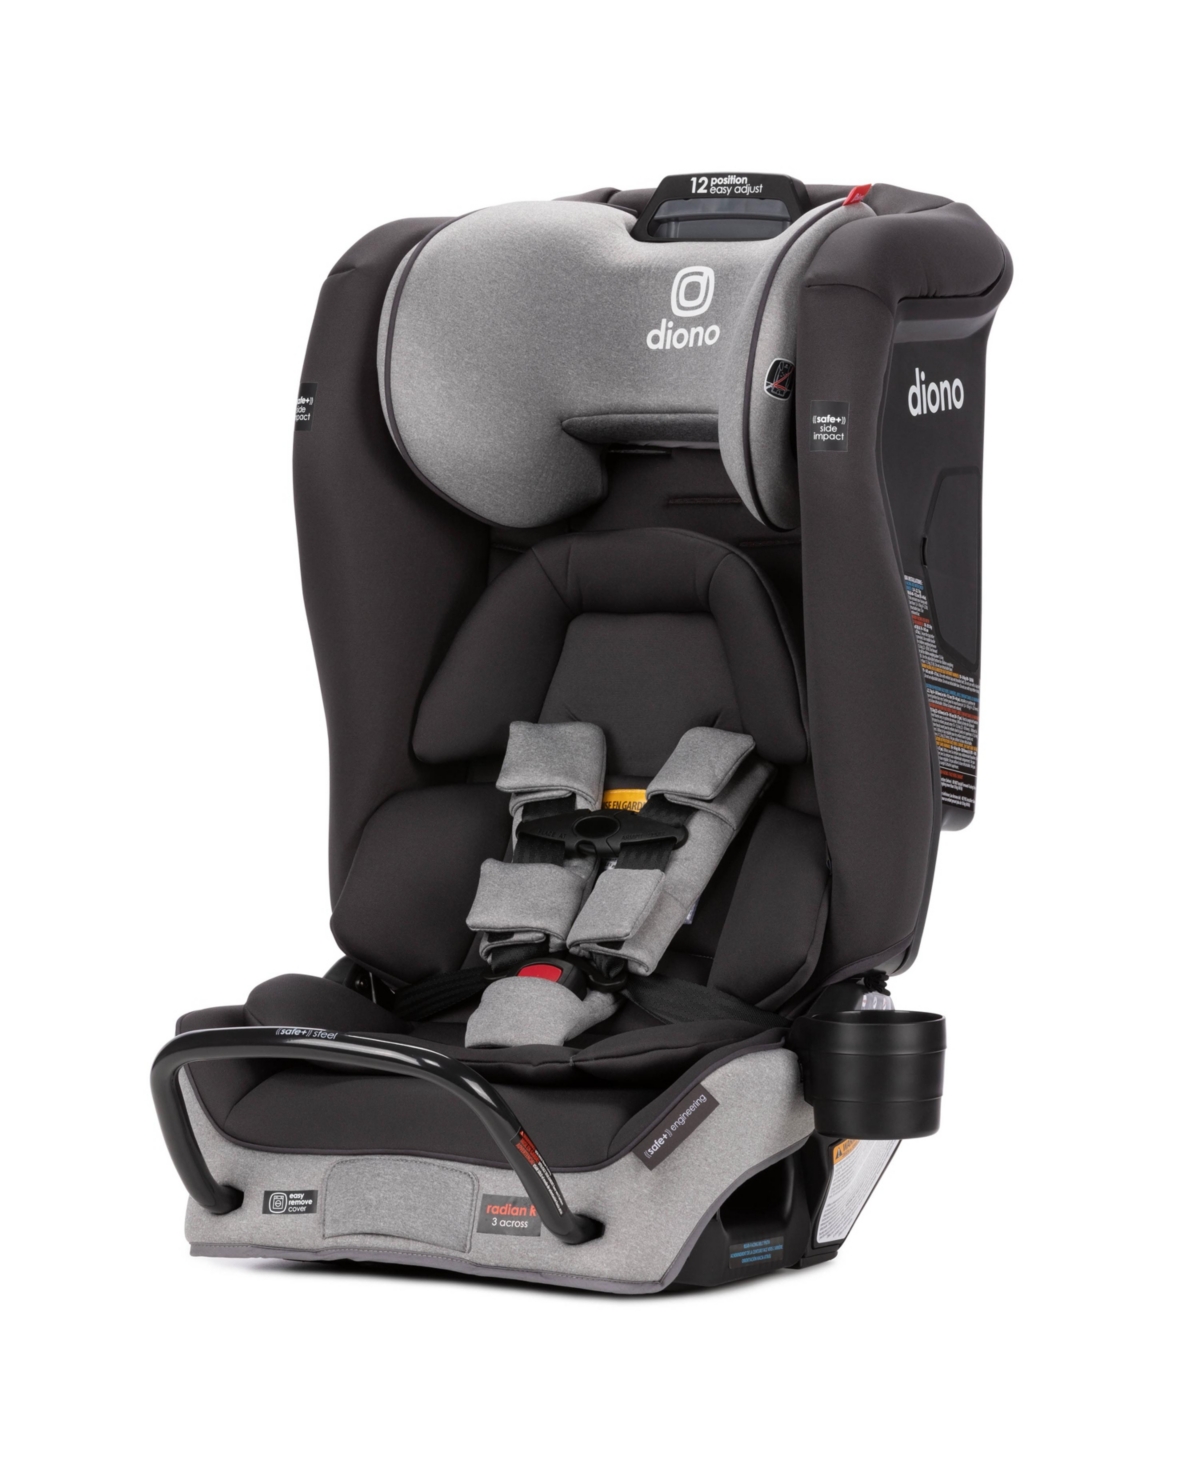 DIONO RADIAN 3RXT SAFEPLUS ALL-IN-ONE CONVERTIBLE CAR SEAT